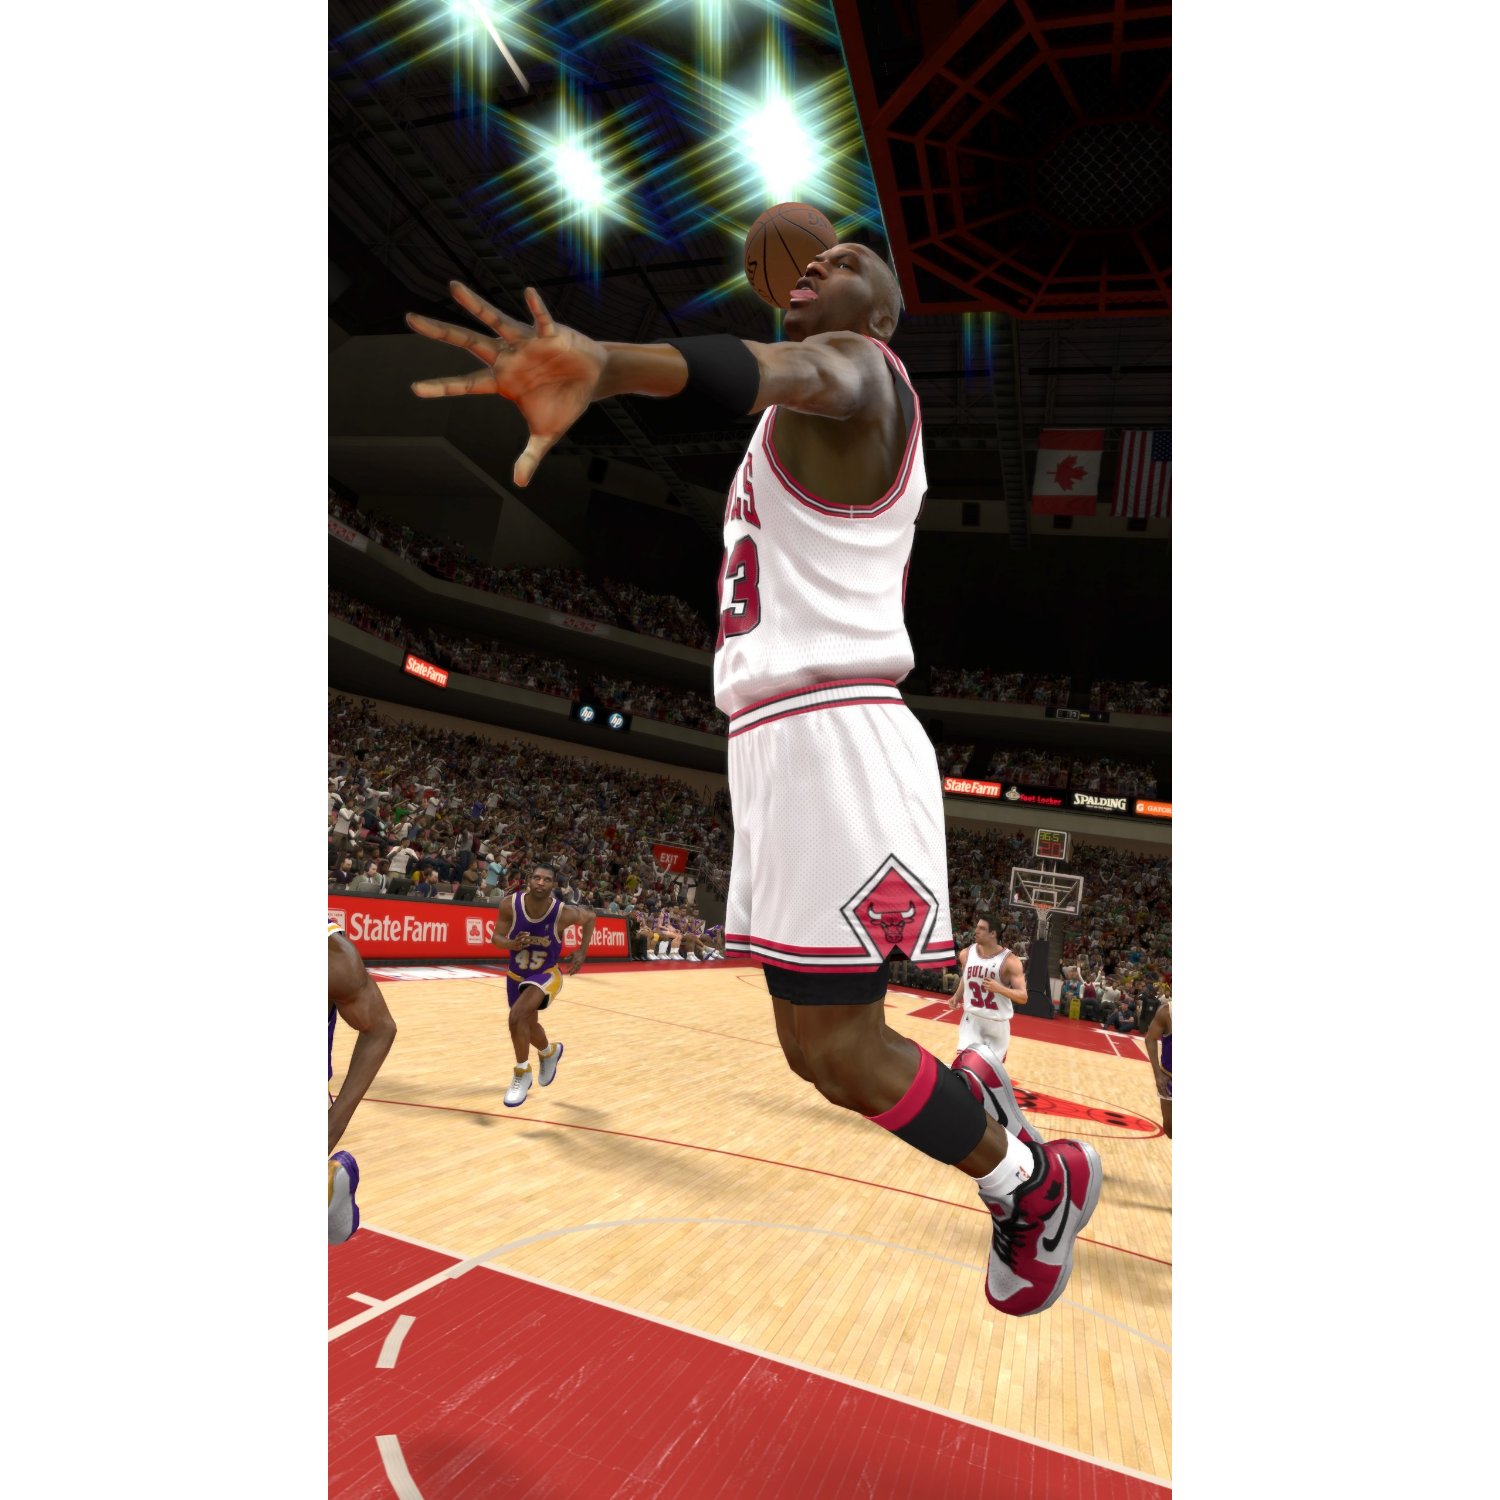 http://thetechjournal.com/wp-content/uploads/images/1109/1316953461-nba-2k12--game-for-preorder-now-4.jpg